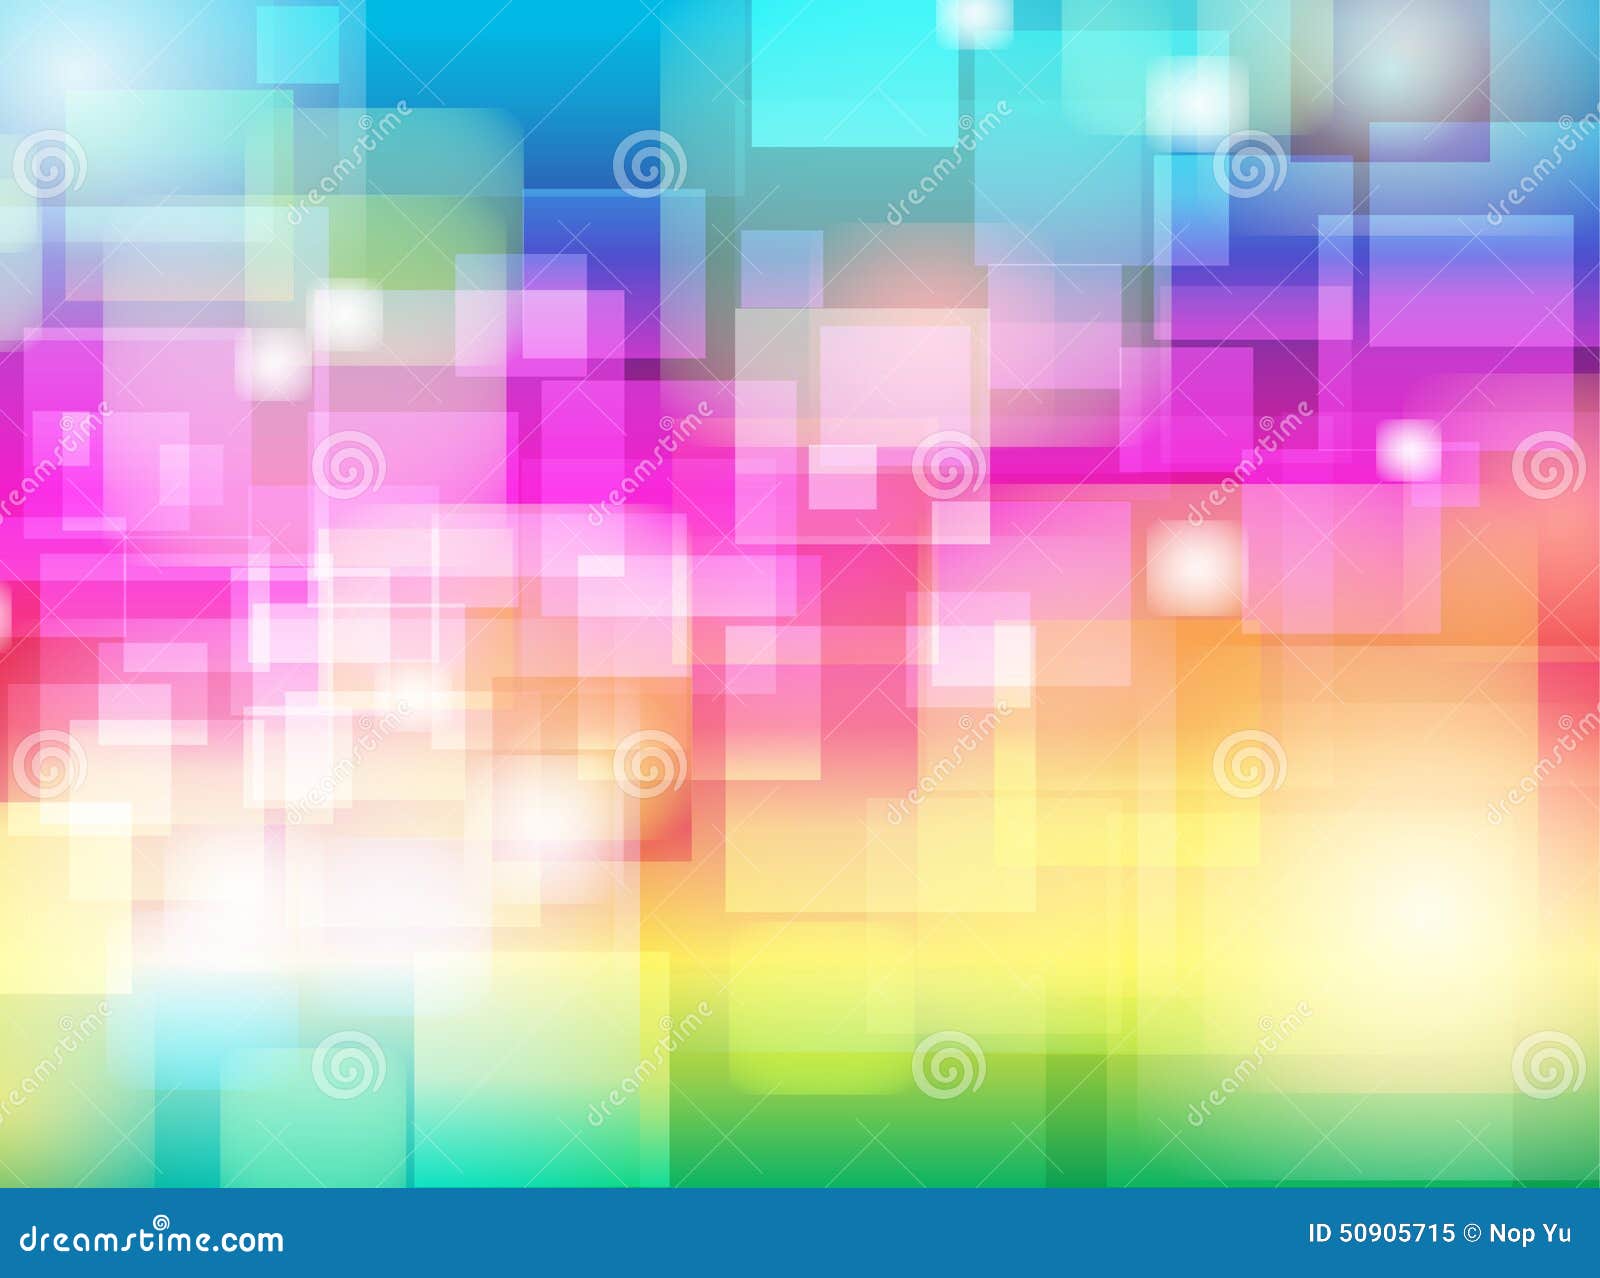 Background Images Stock Backgrounds